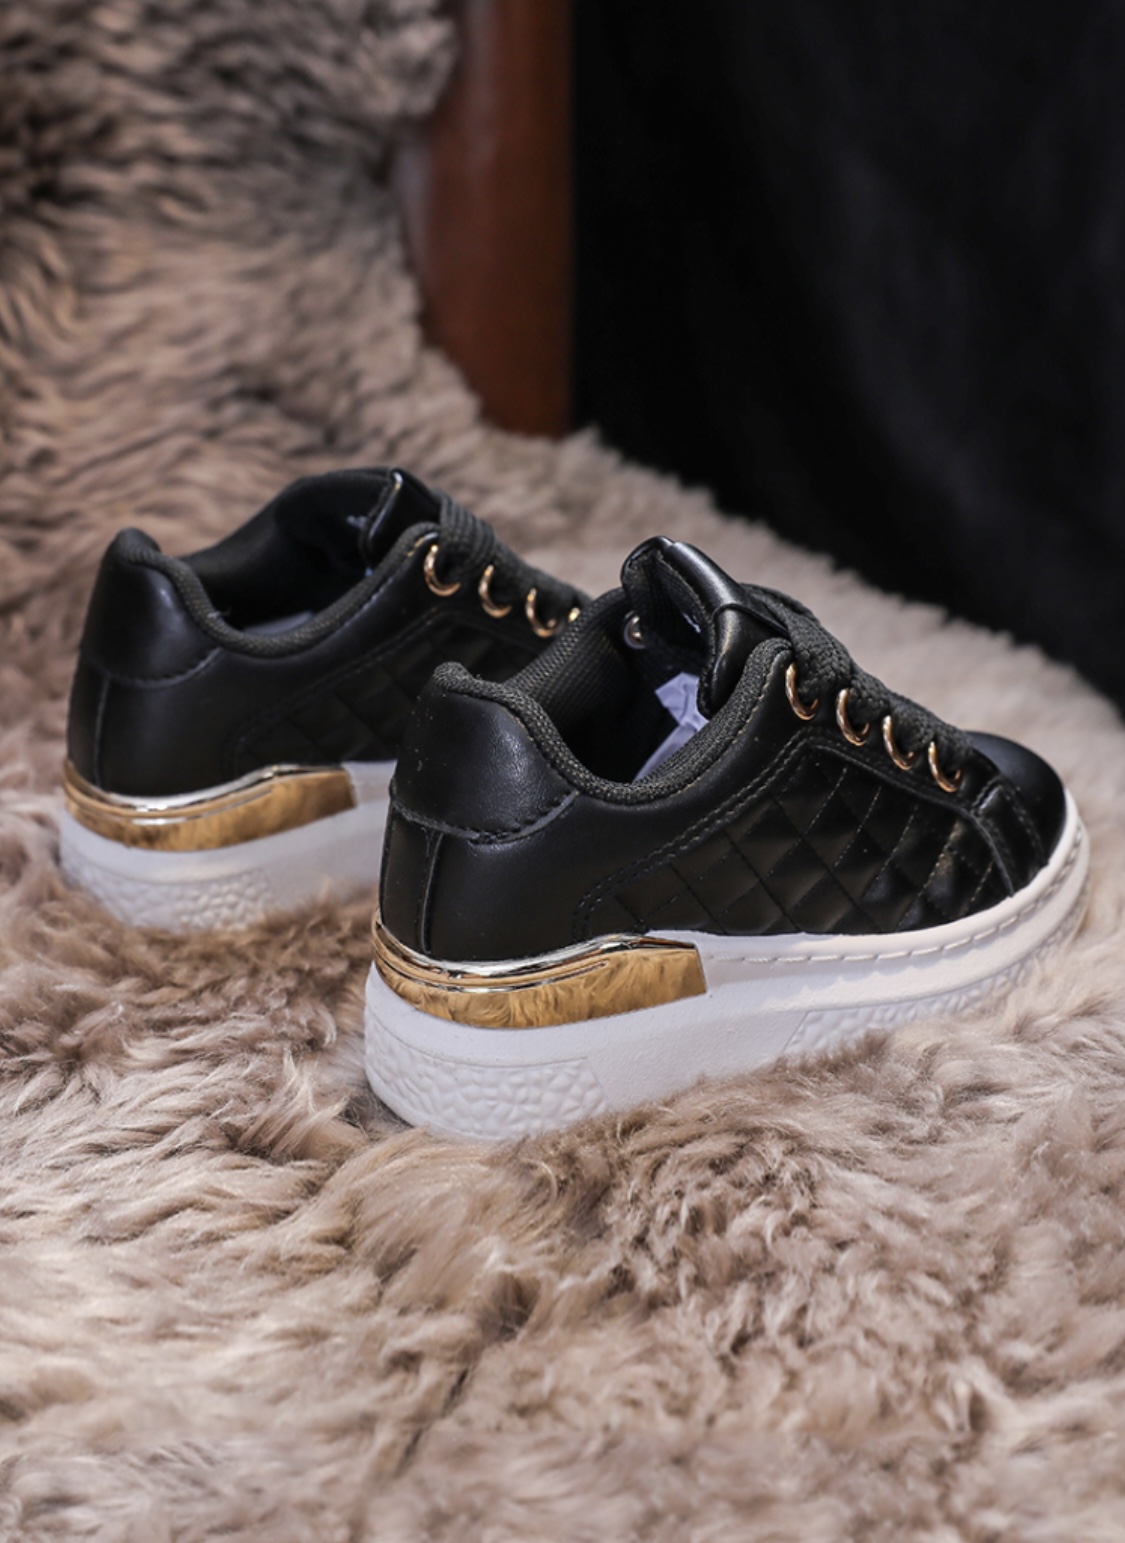 Itty Bitty Black Quilted Platform Trainers | Itty Bitty